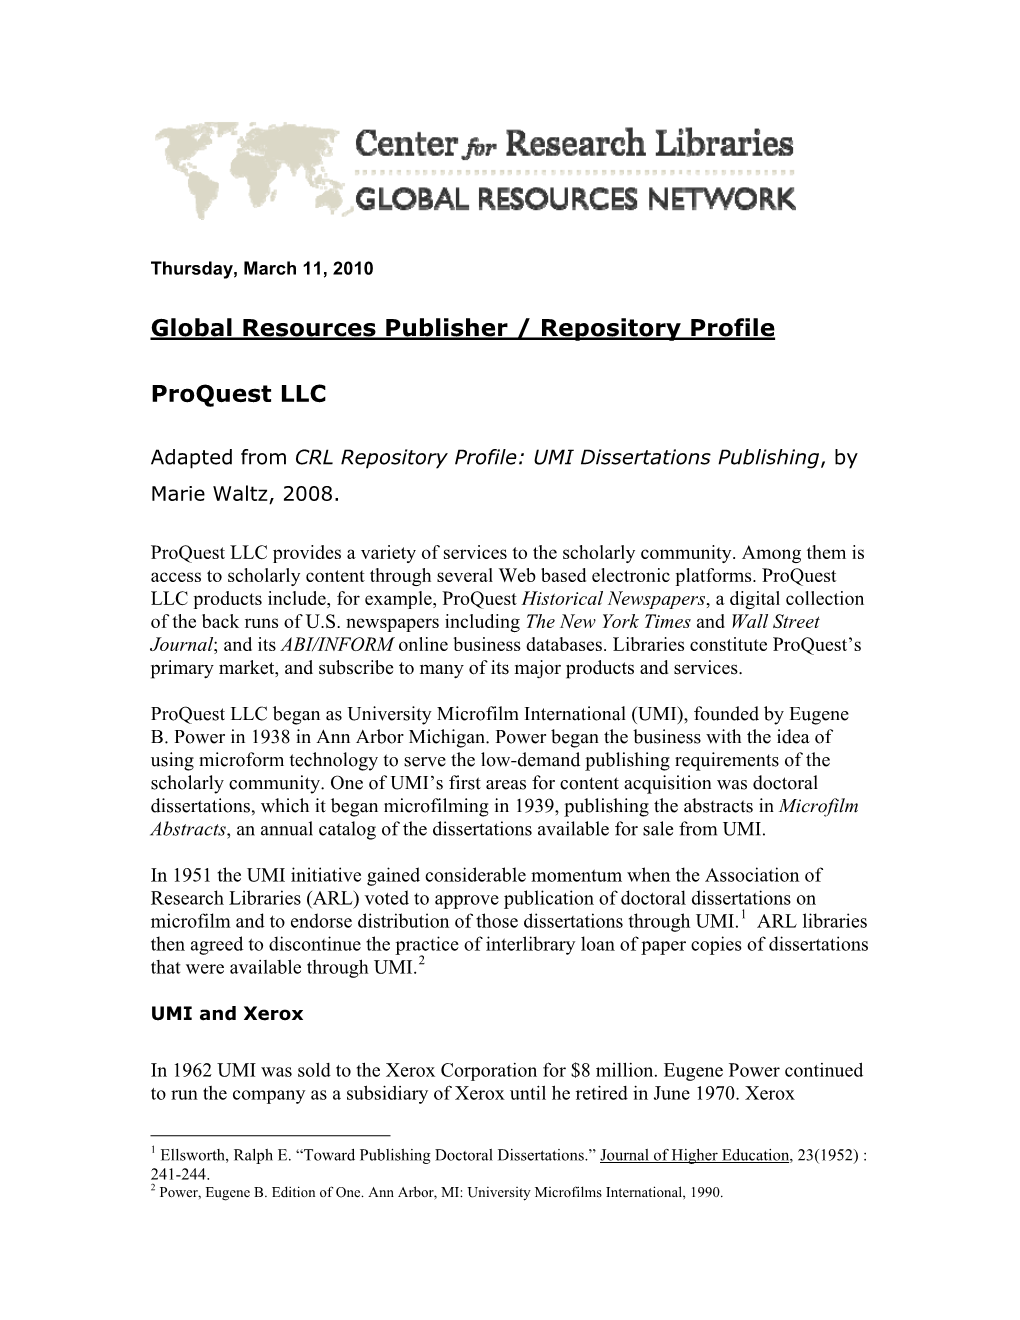 Global Resources Publisher / Repository Profile